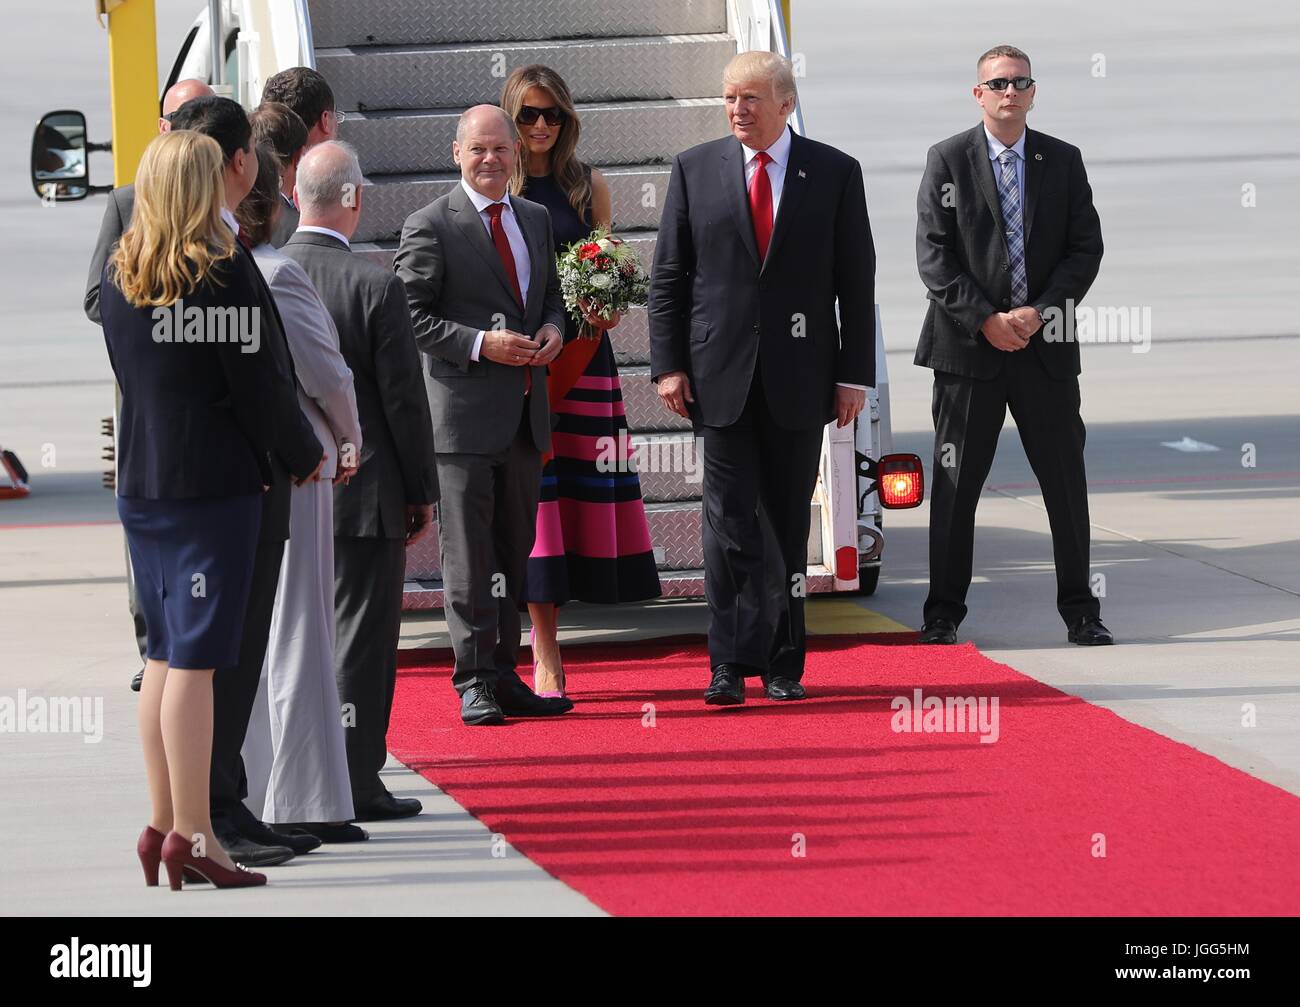 Hamburg, Germany. 06th July, 2017. The Mayor of Hamburg Olaf Scholz, center, welcomes U.S. President Donald Trump and First Lady Melania Trump on arrival for the start of the G20 Summit meeting at Hamburg Airport July 6, 2017 in Hamburg, Germany. (U.S. State Department via Planetpix) Credit: Planetpix/Alamy Live News Stock Photo